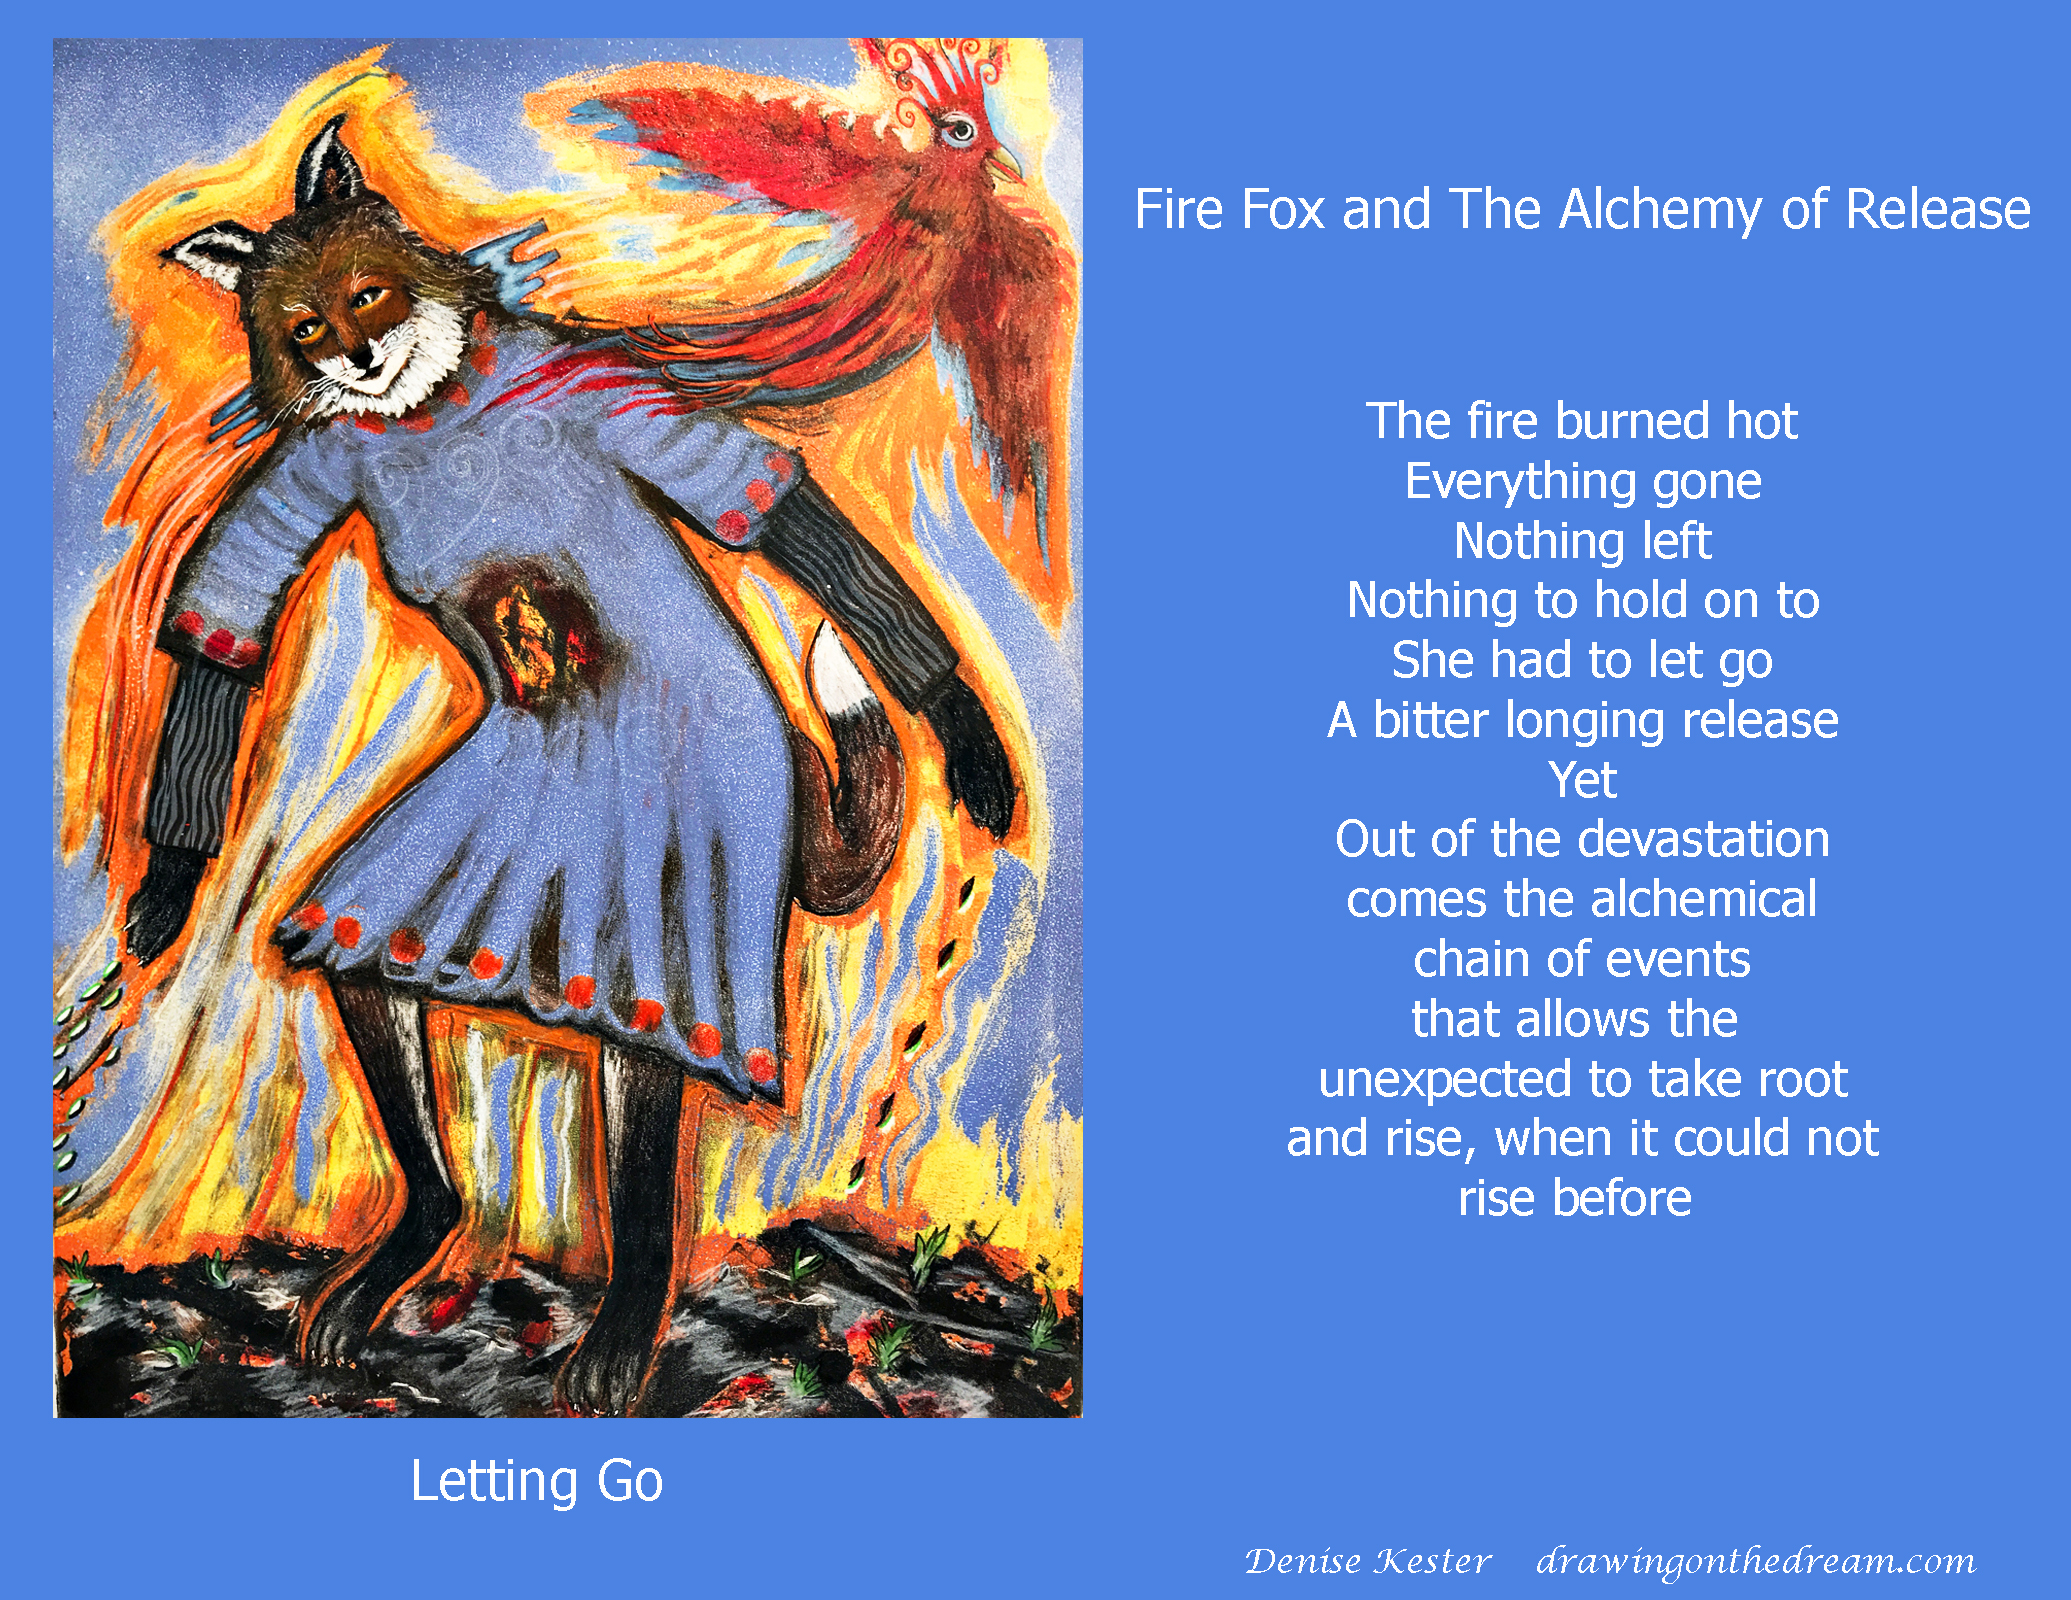 Denise Kester: Fire Fox and The Alchemy of Release